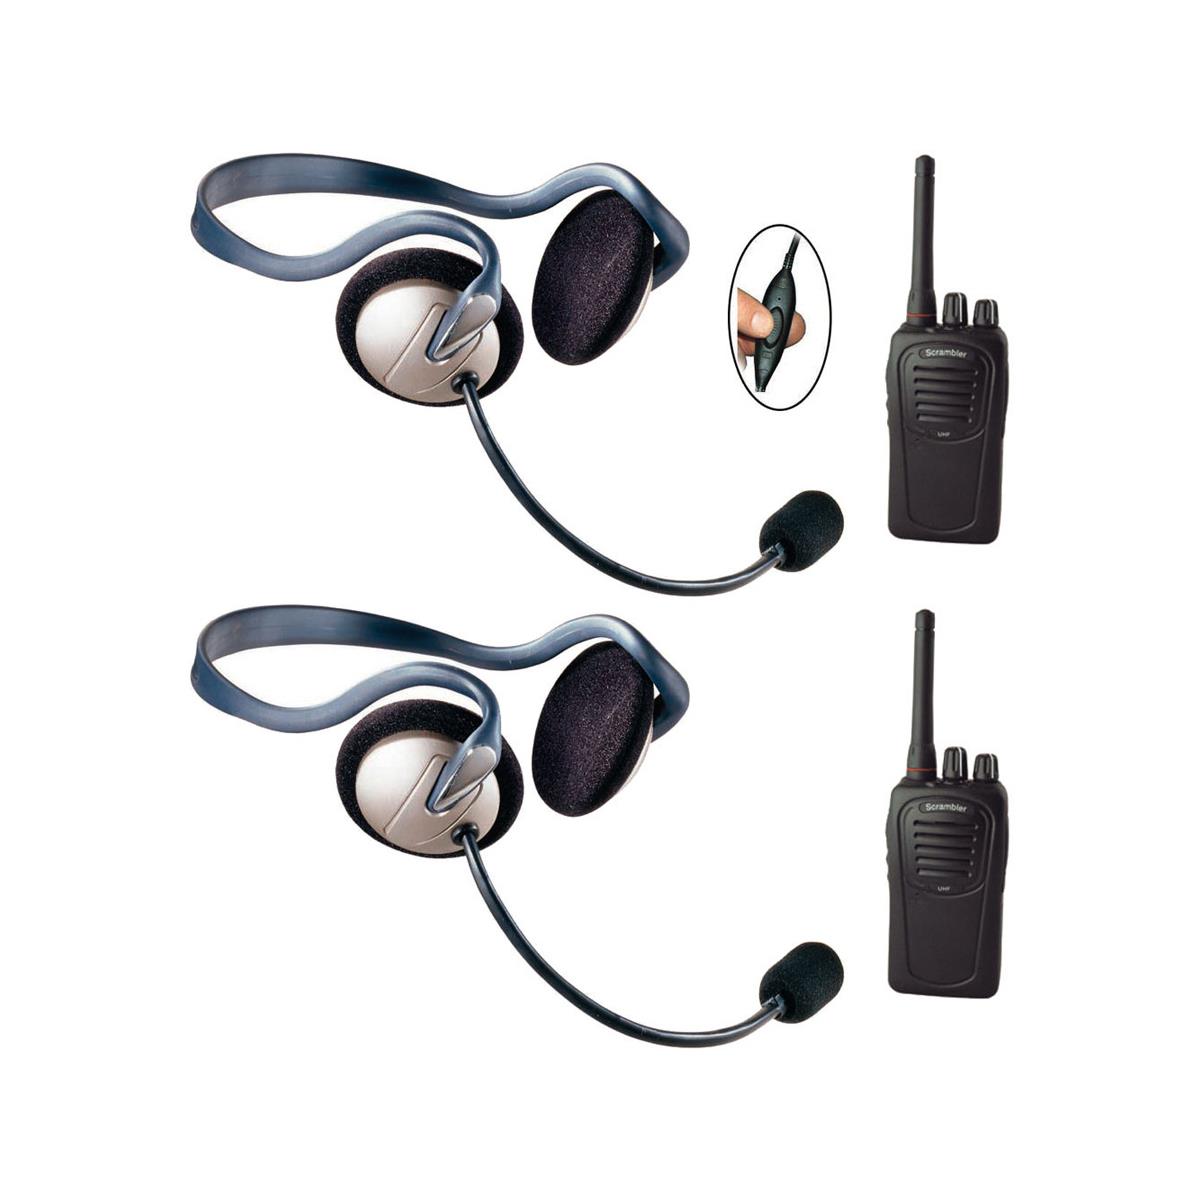 Image of Eartec SC-1000 2-User Two-Way Radio System with 2x Monarch Inline PTT Headsets